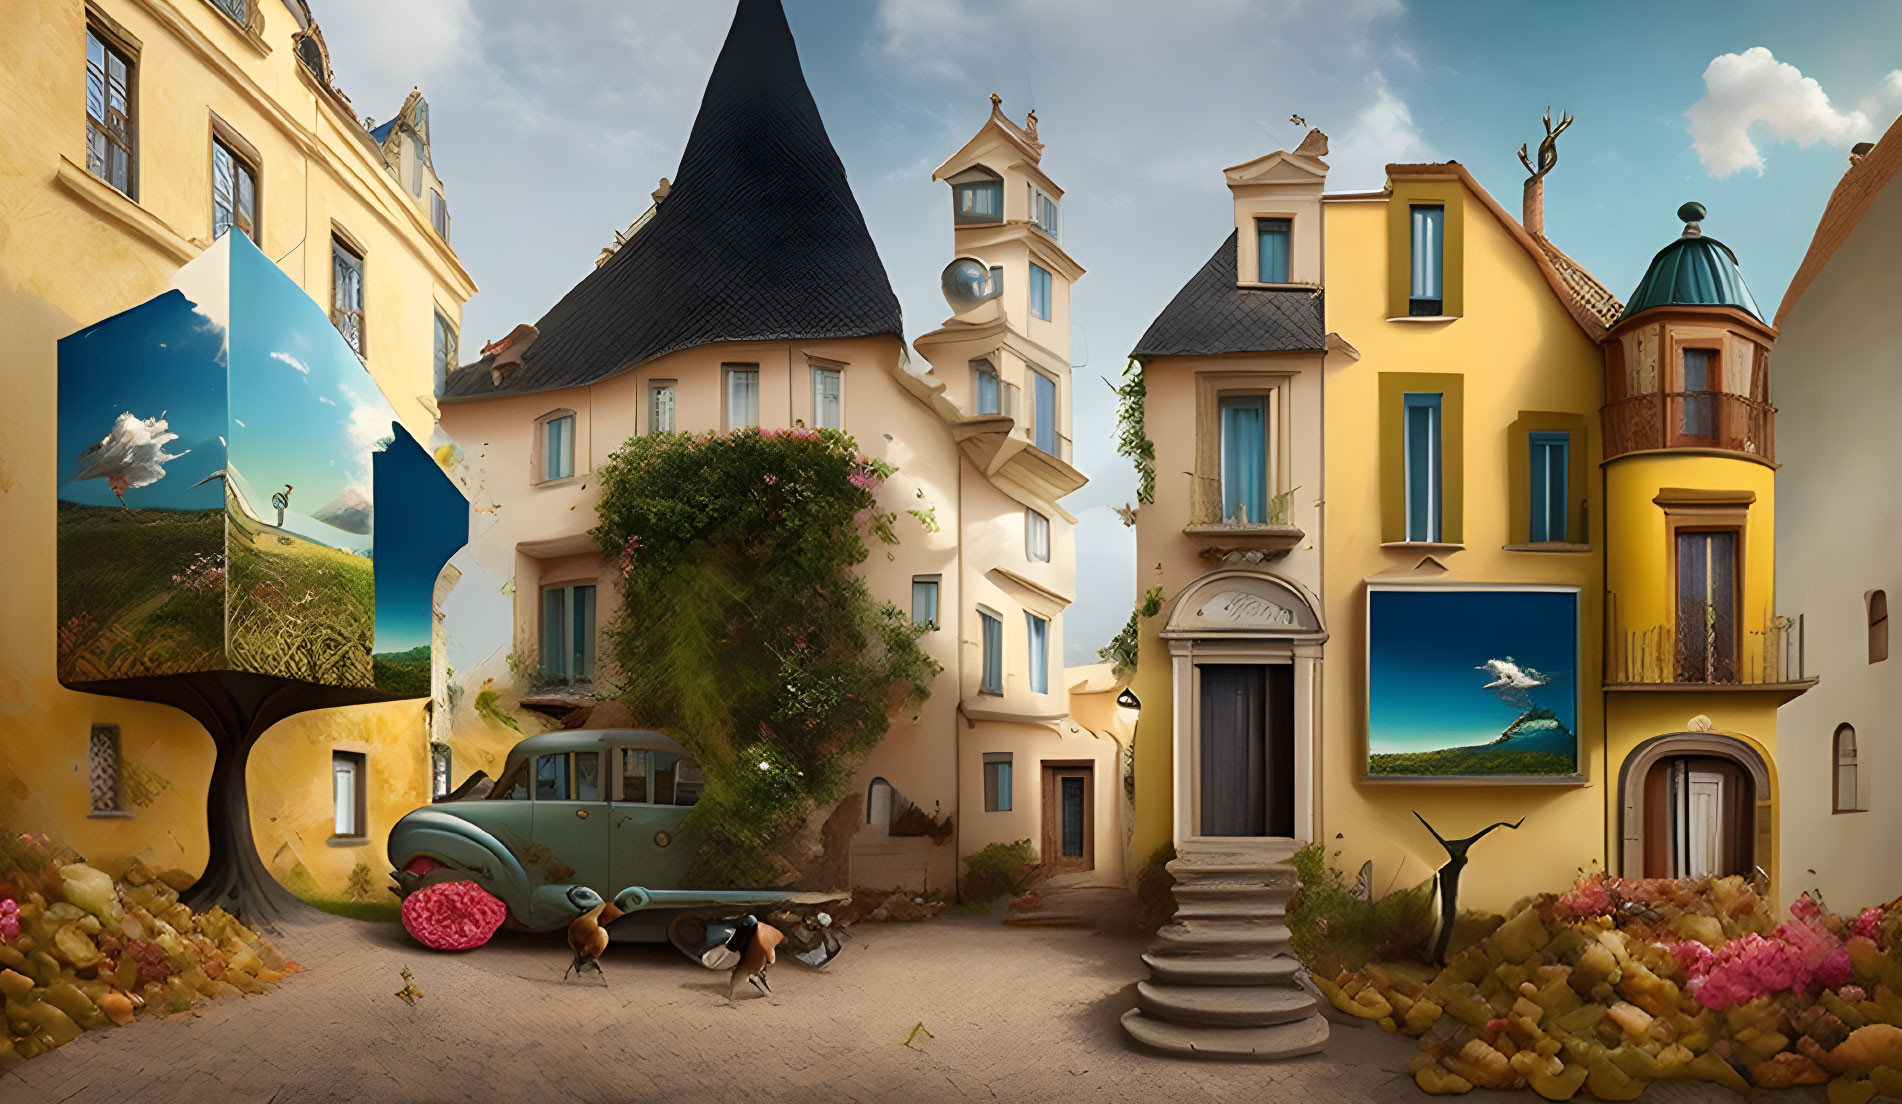 Whimsical street scene with quirky houses, floating islands, old car, and oversized birds